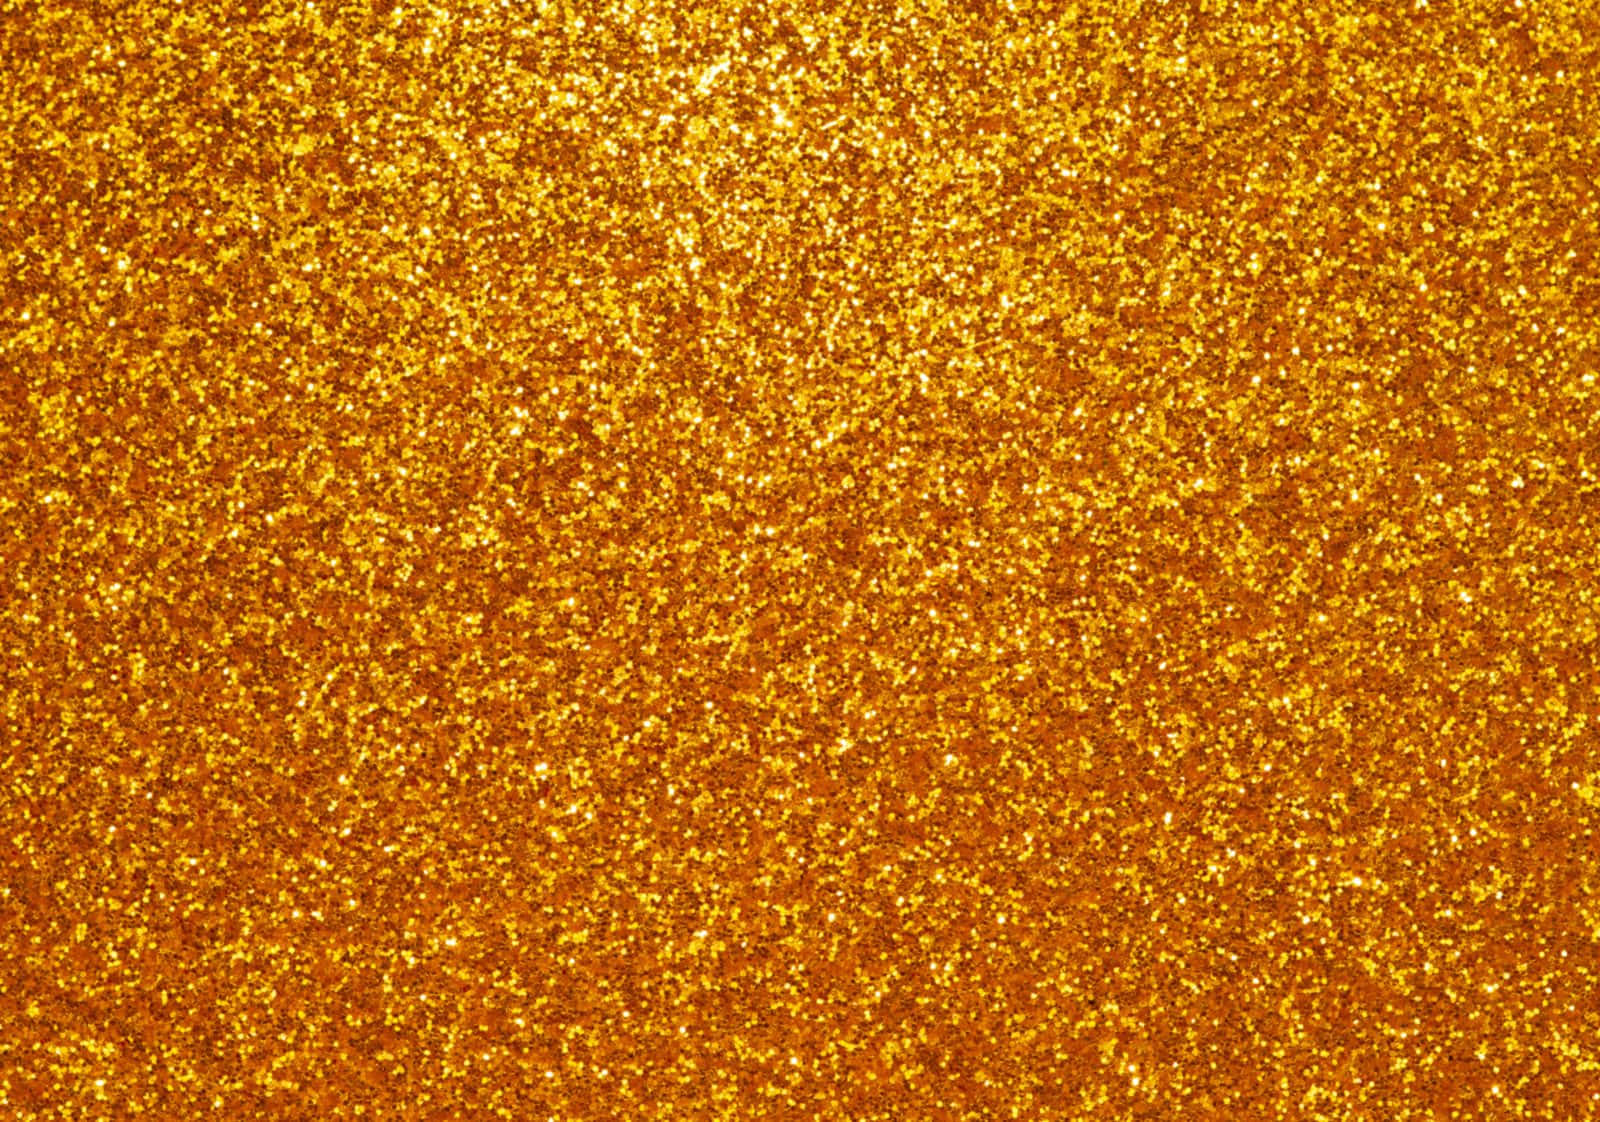 Gleaming gold textured background